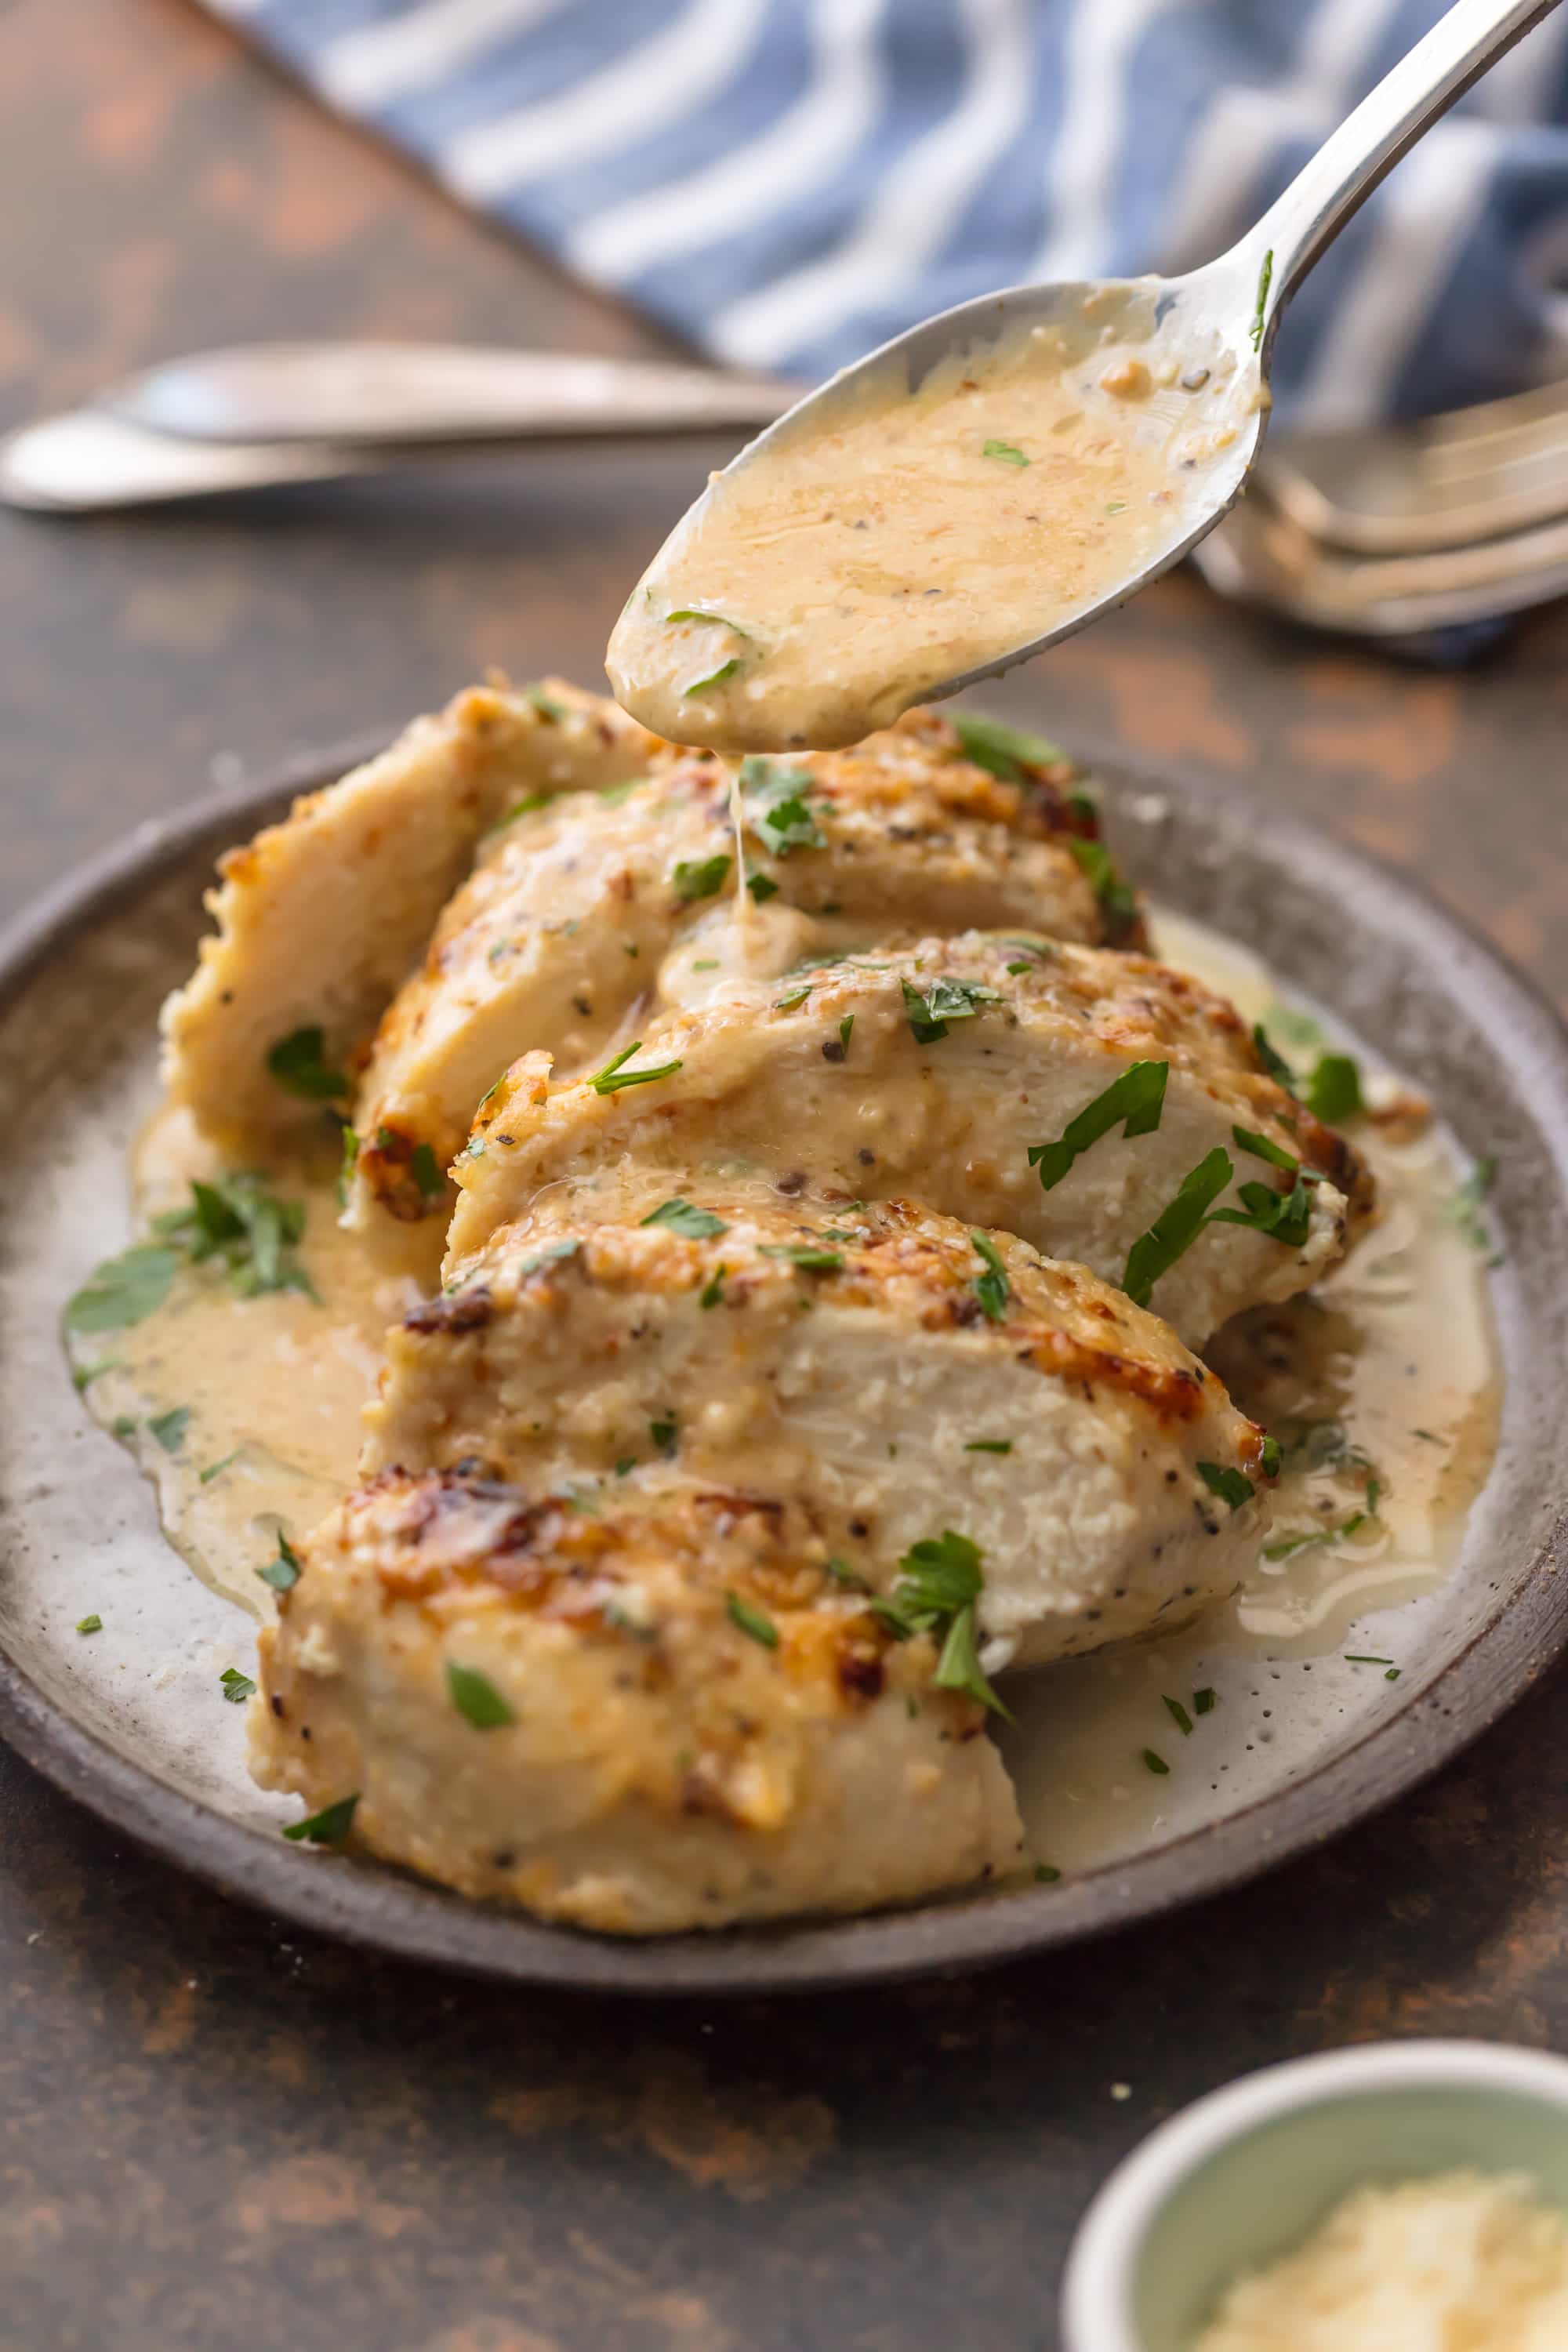 spooning creamy sauce over a plate of chicken